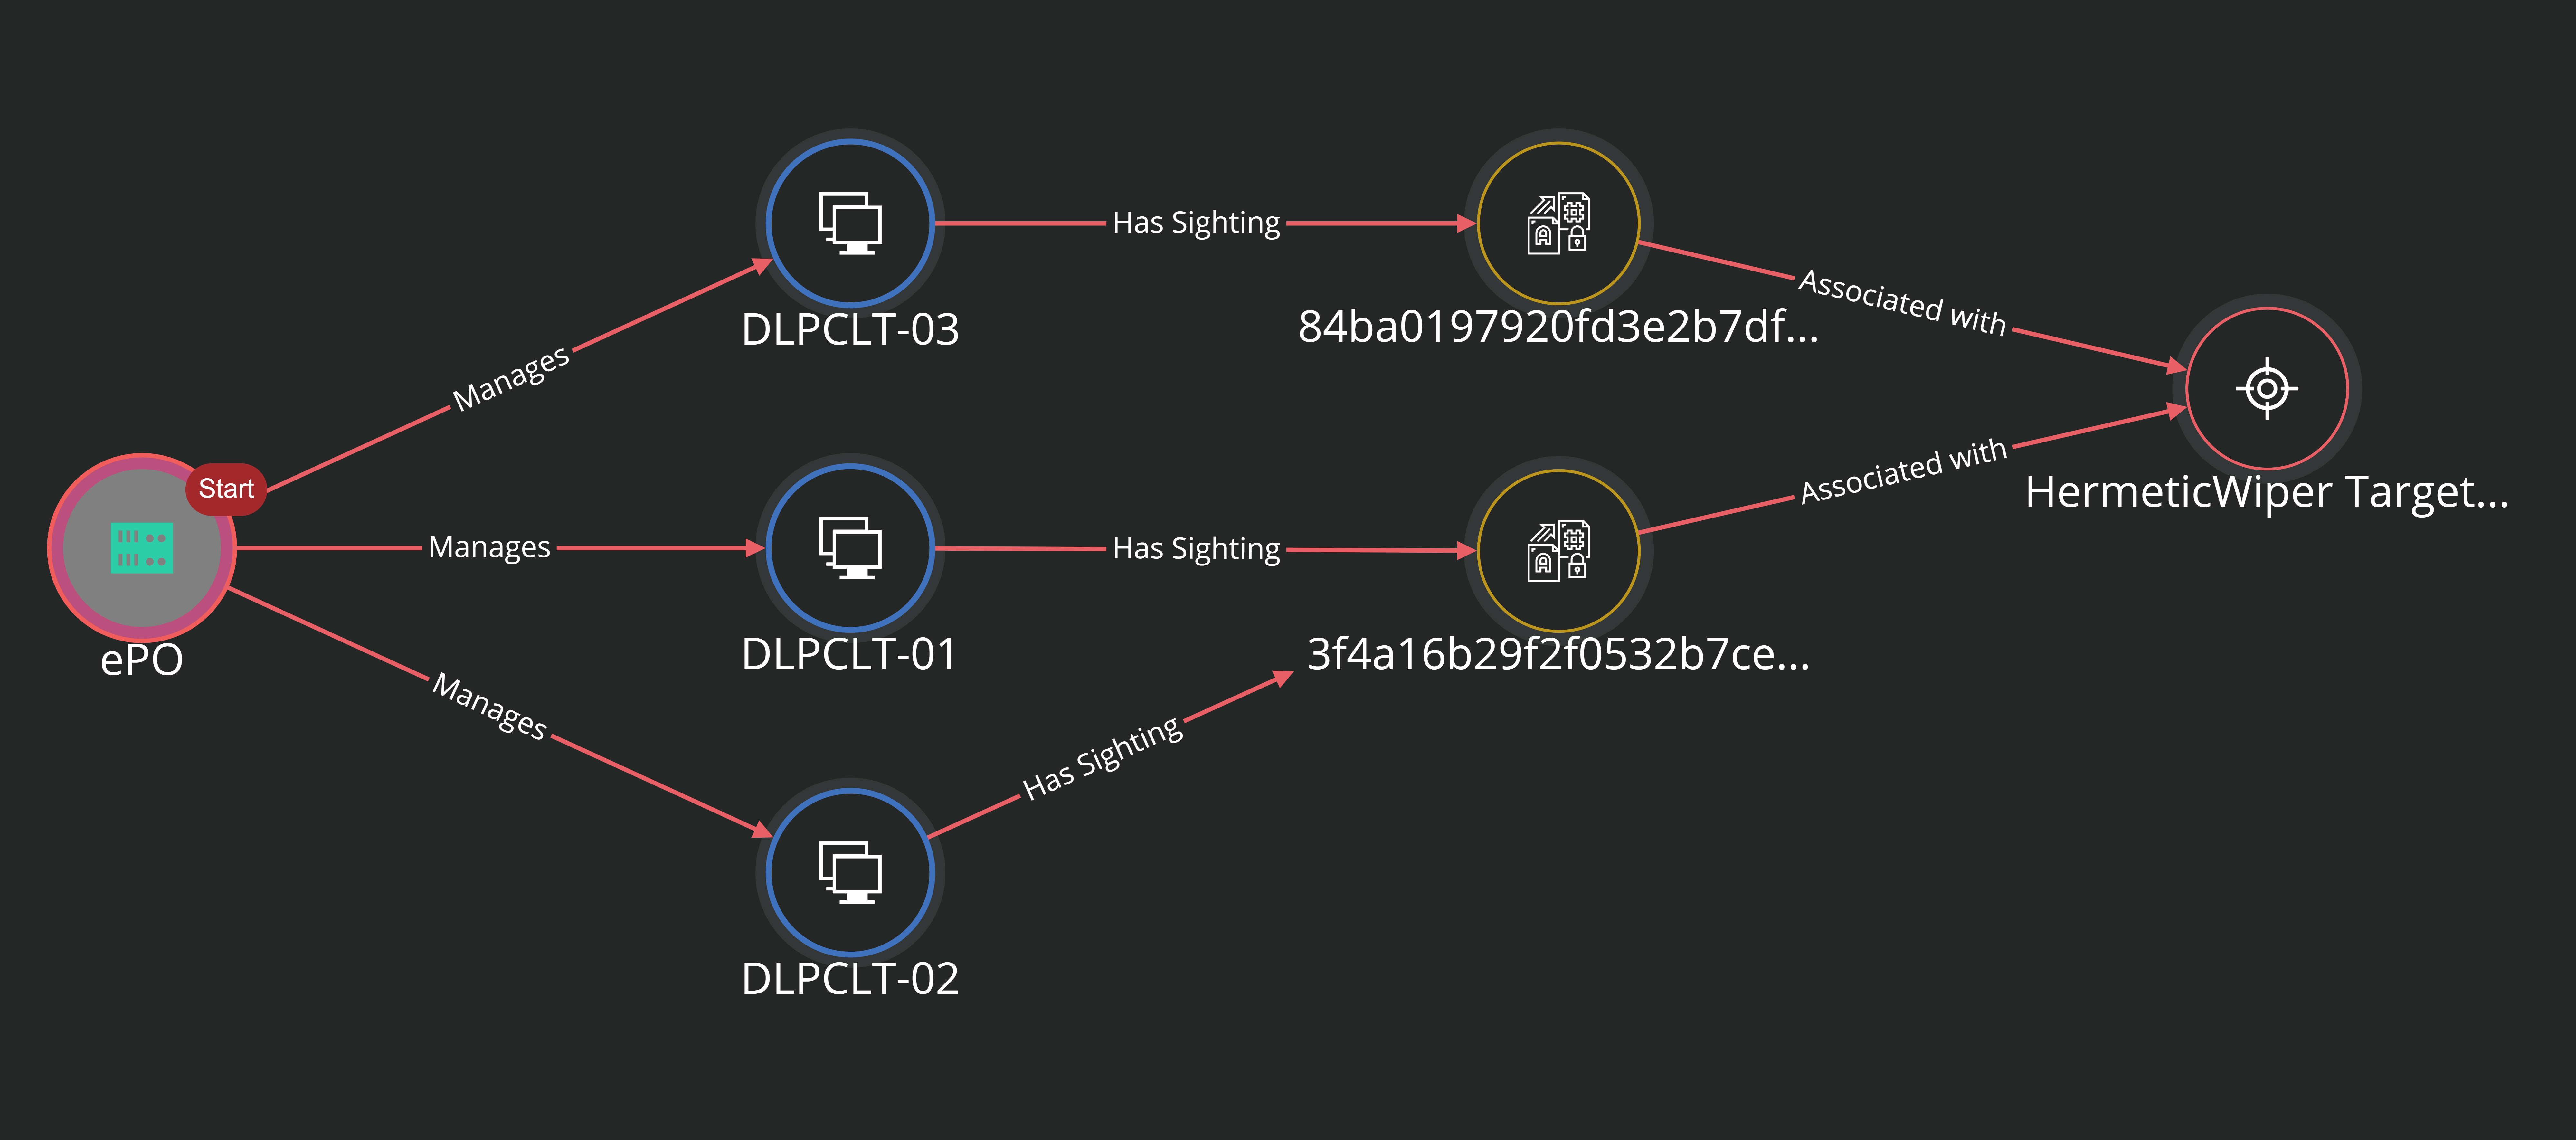 Figure 2. Test system detections of HermeticWiper IOCS. Source: MVISION Insights